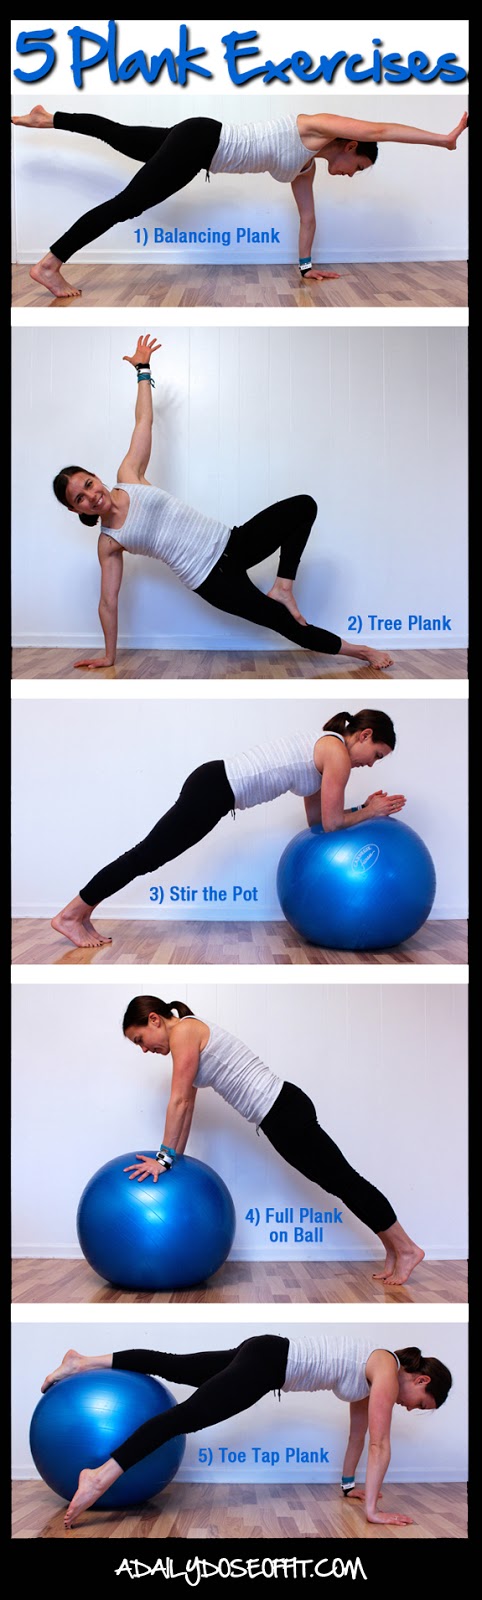 5 Difference Plank Exercises to Strengthen Your Core